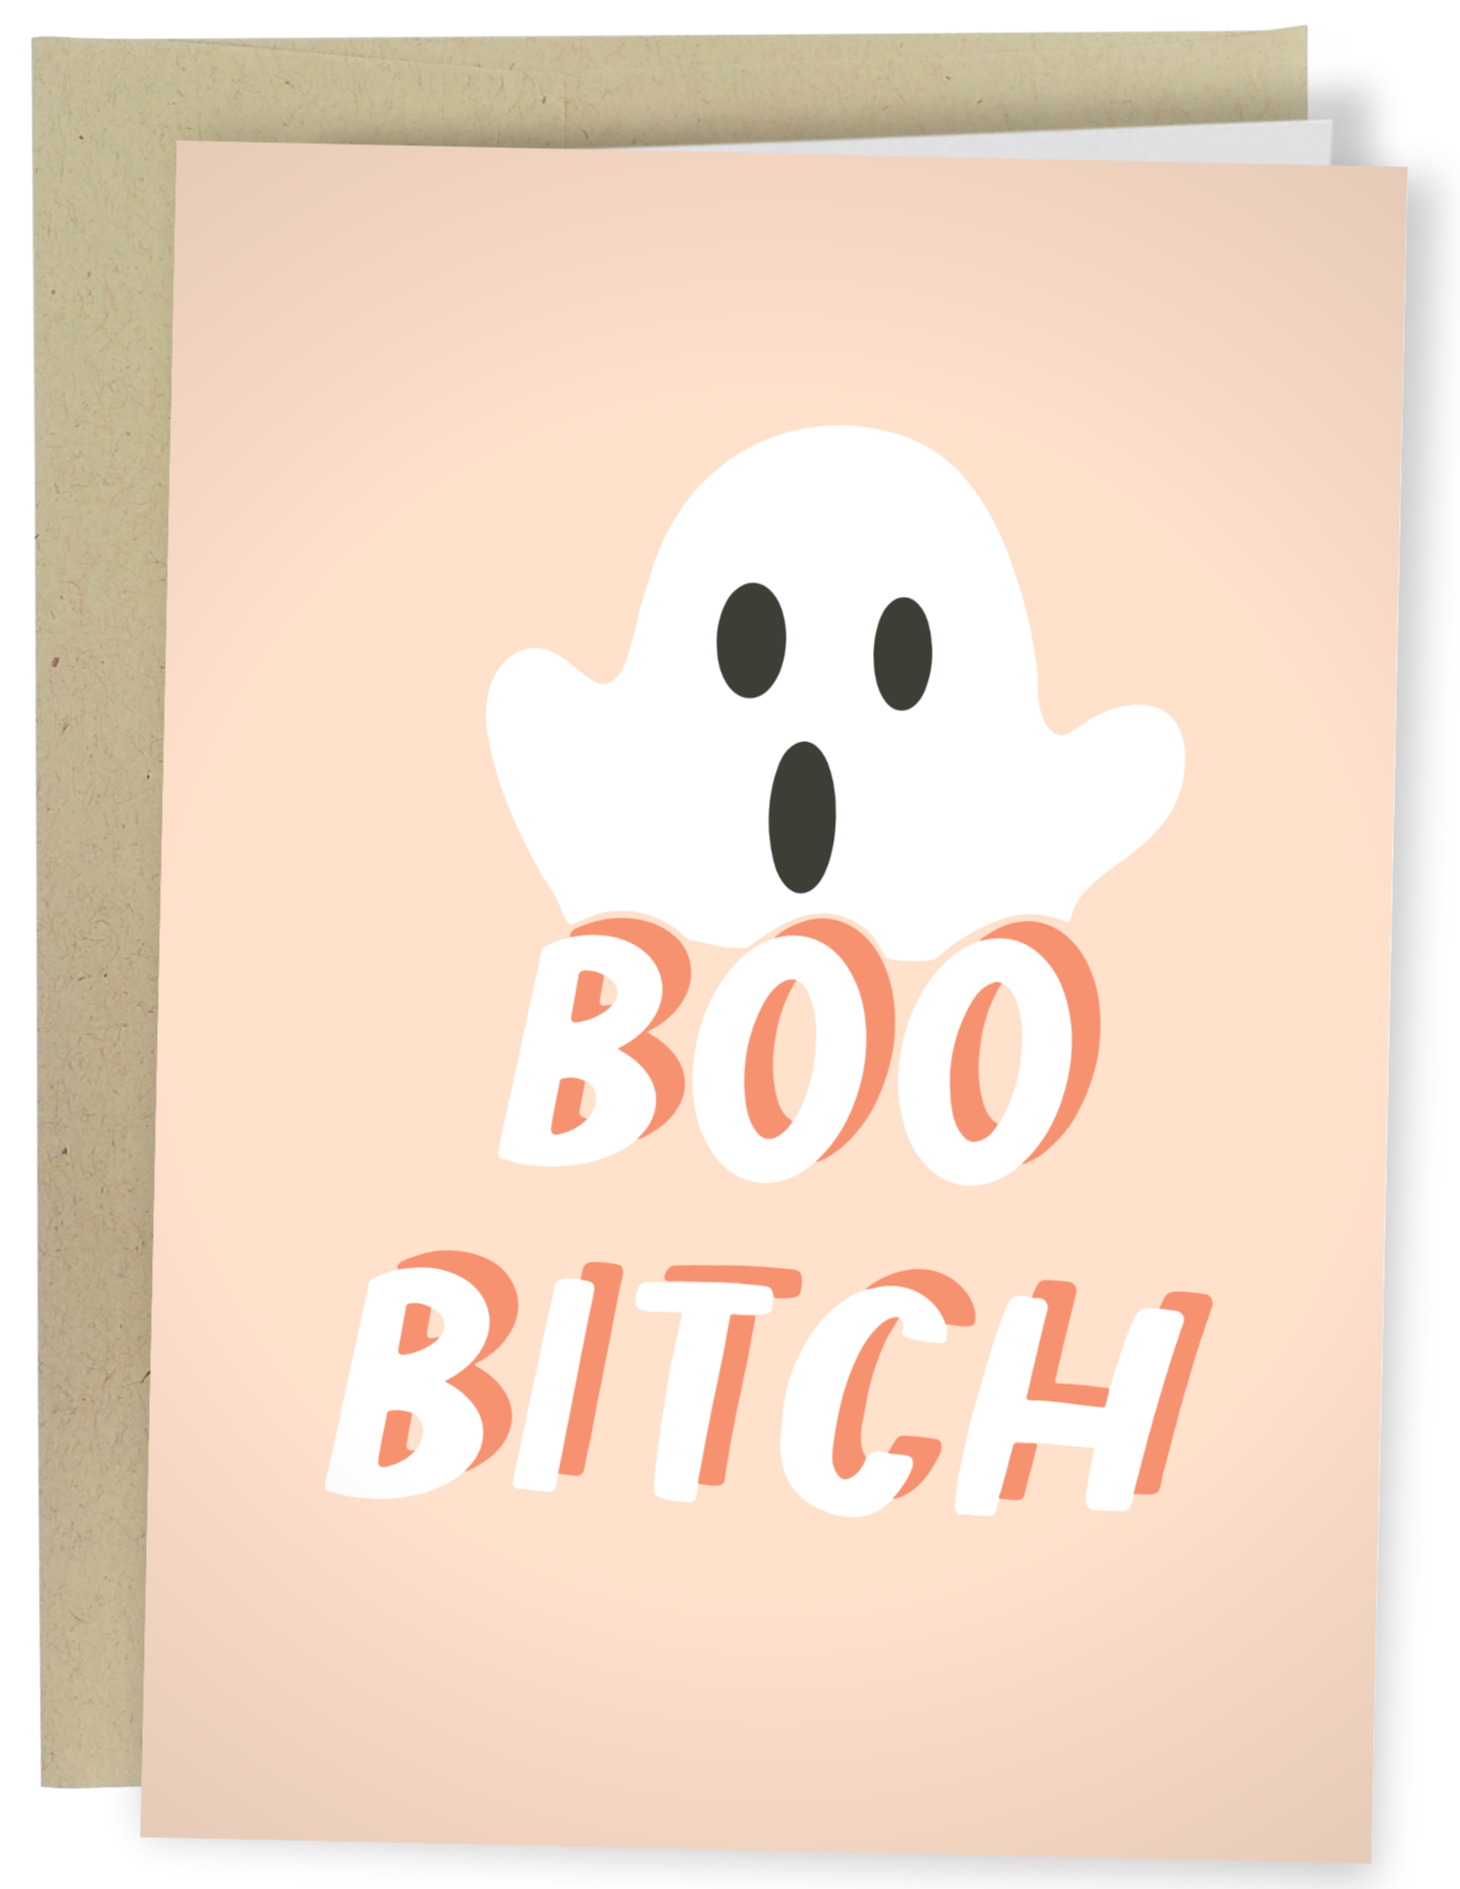 Boo Bitch Greeting Cards